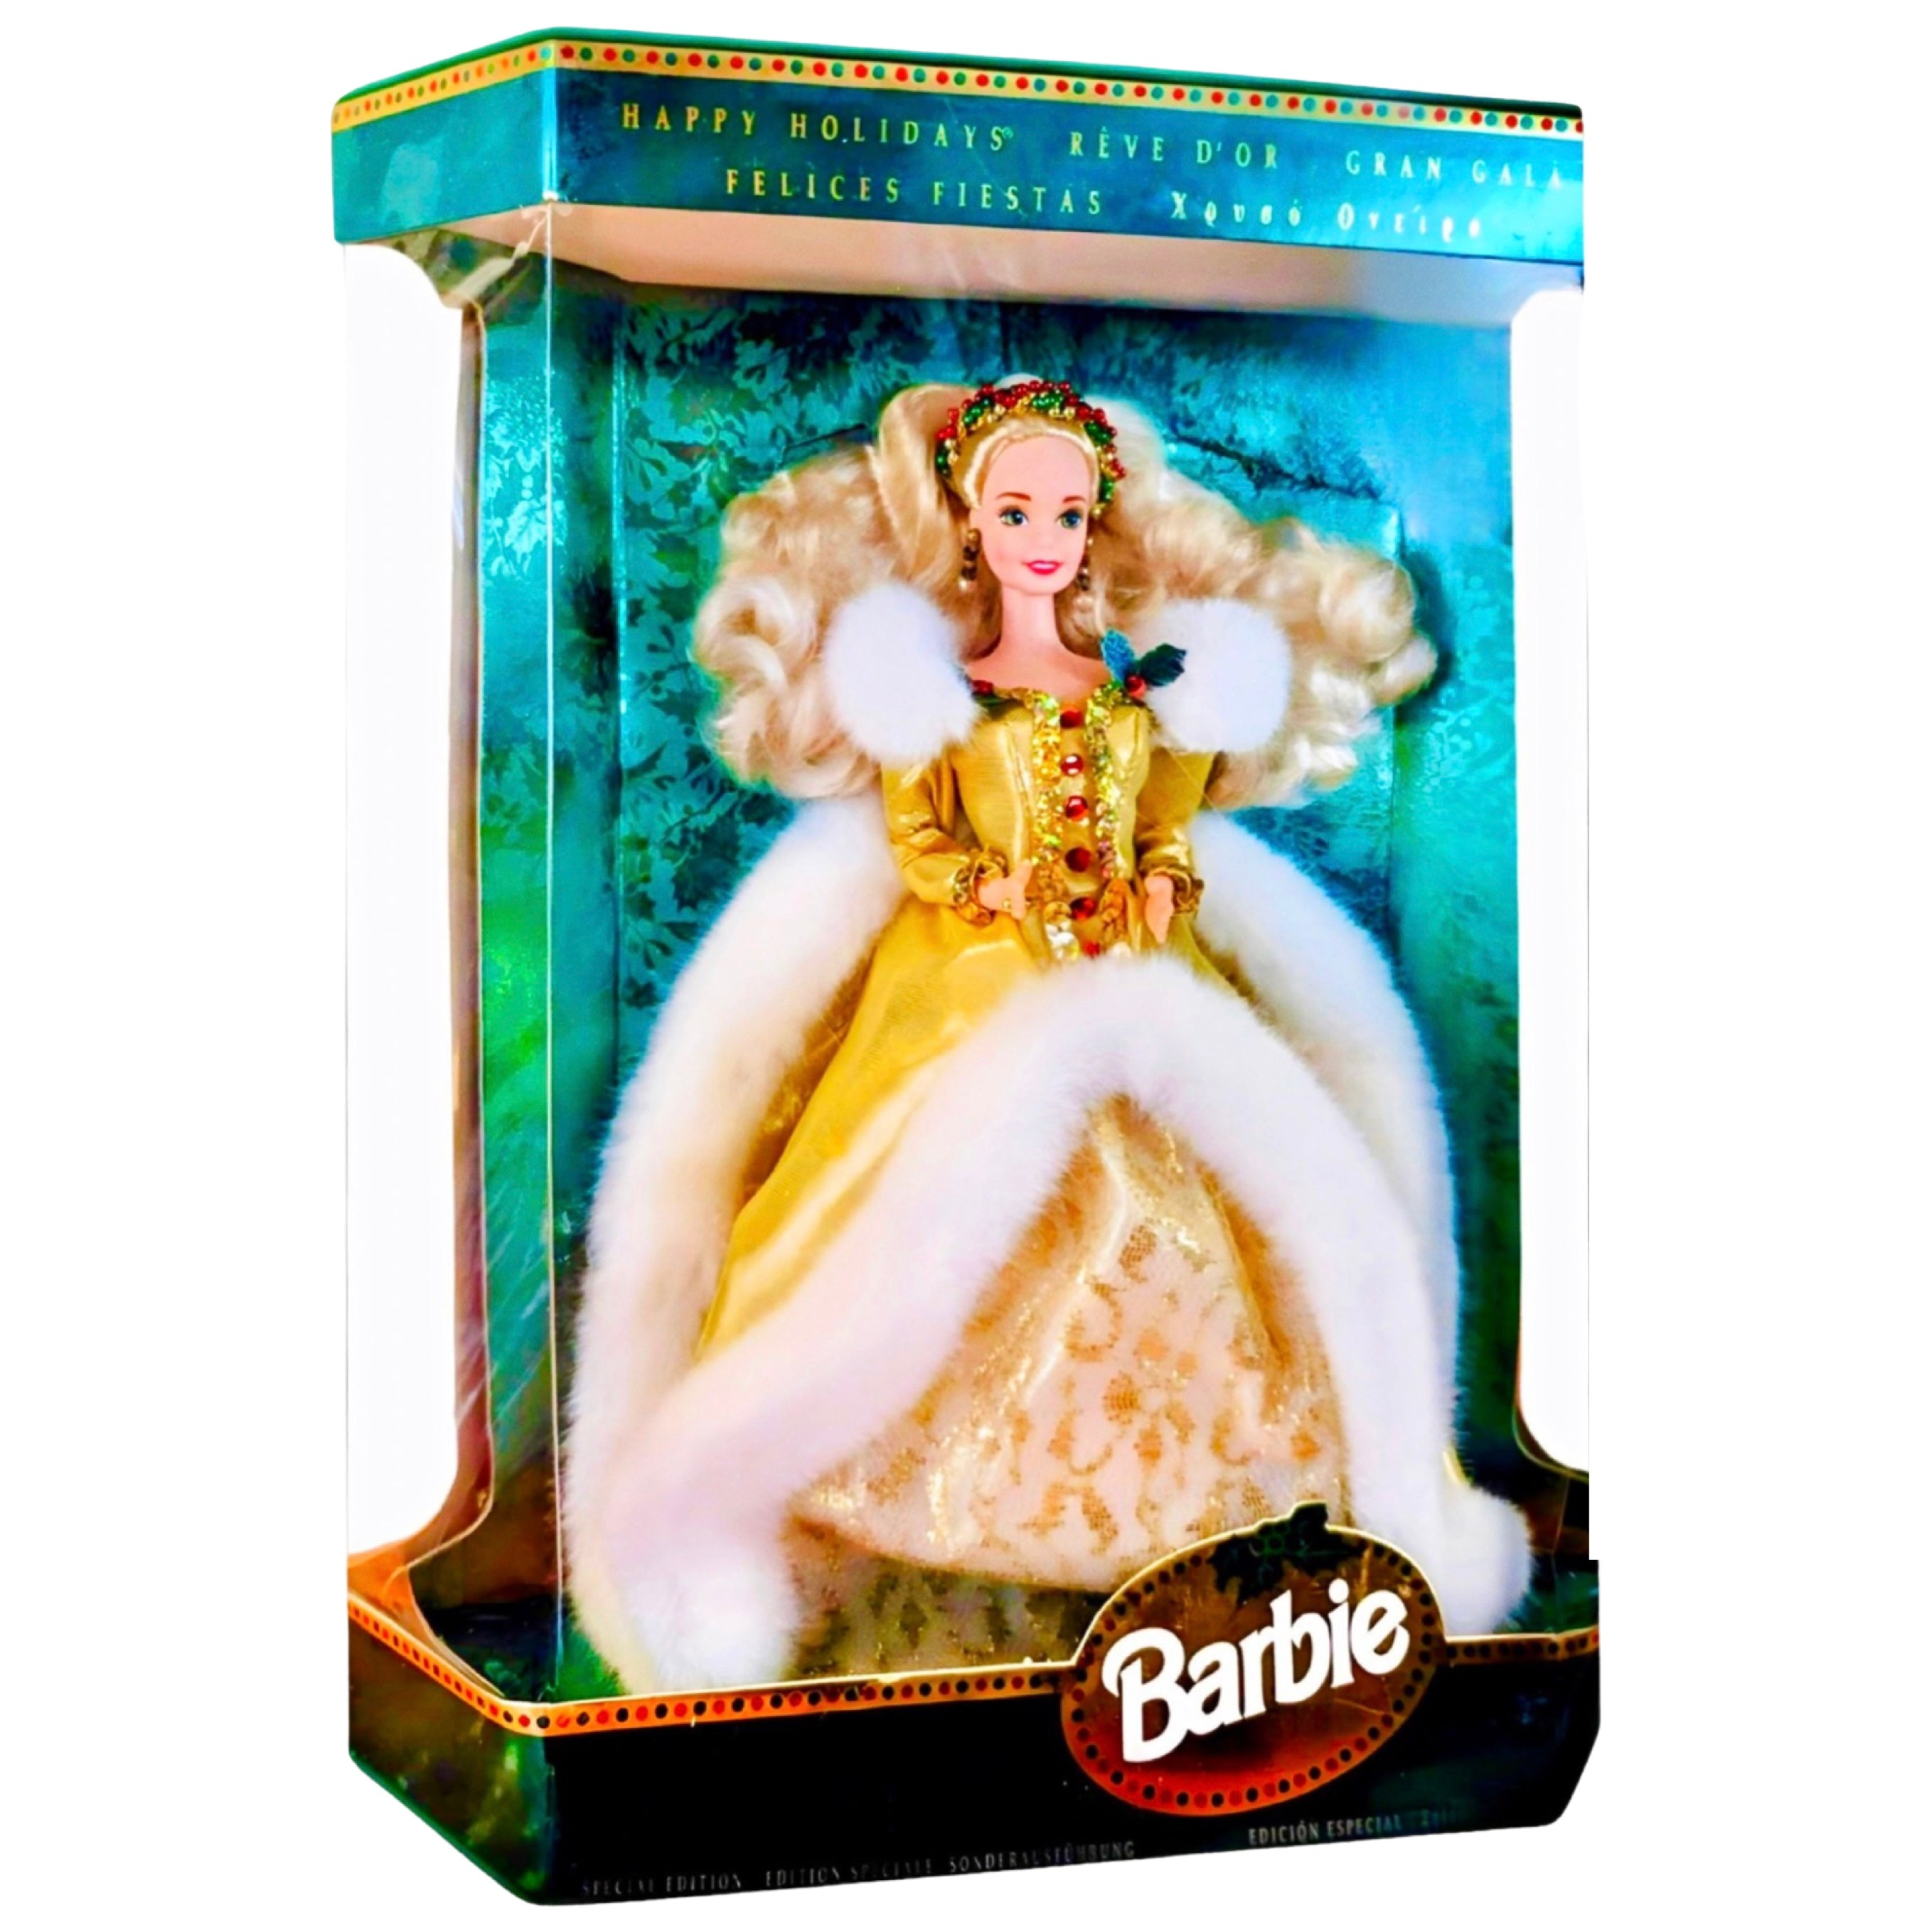 Happy Holidays Special Edition Barbie #12155 | 1994 Mattel